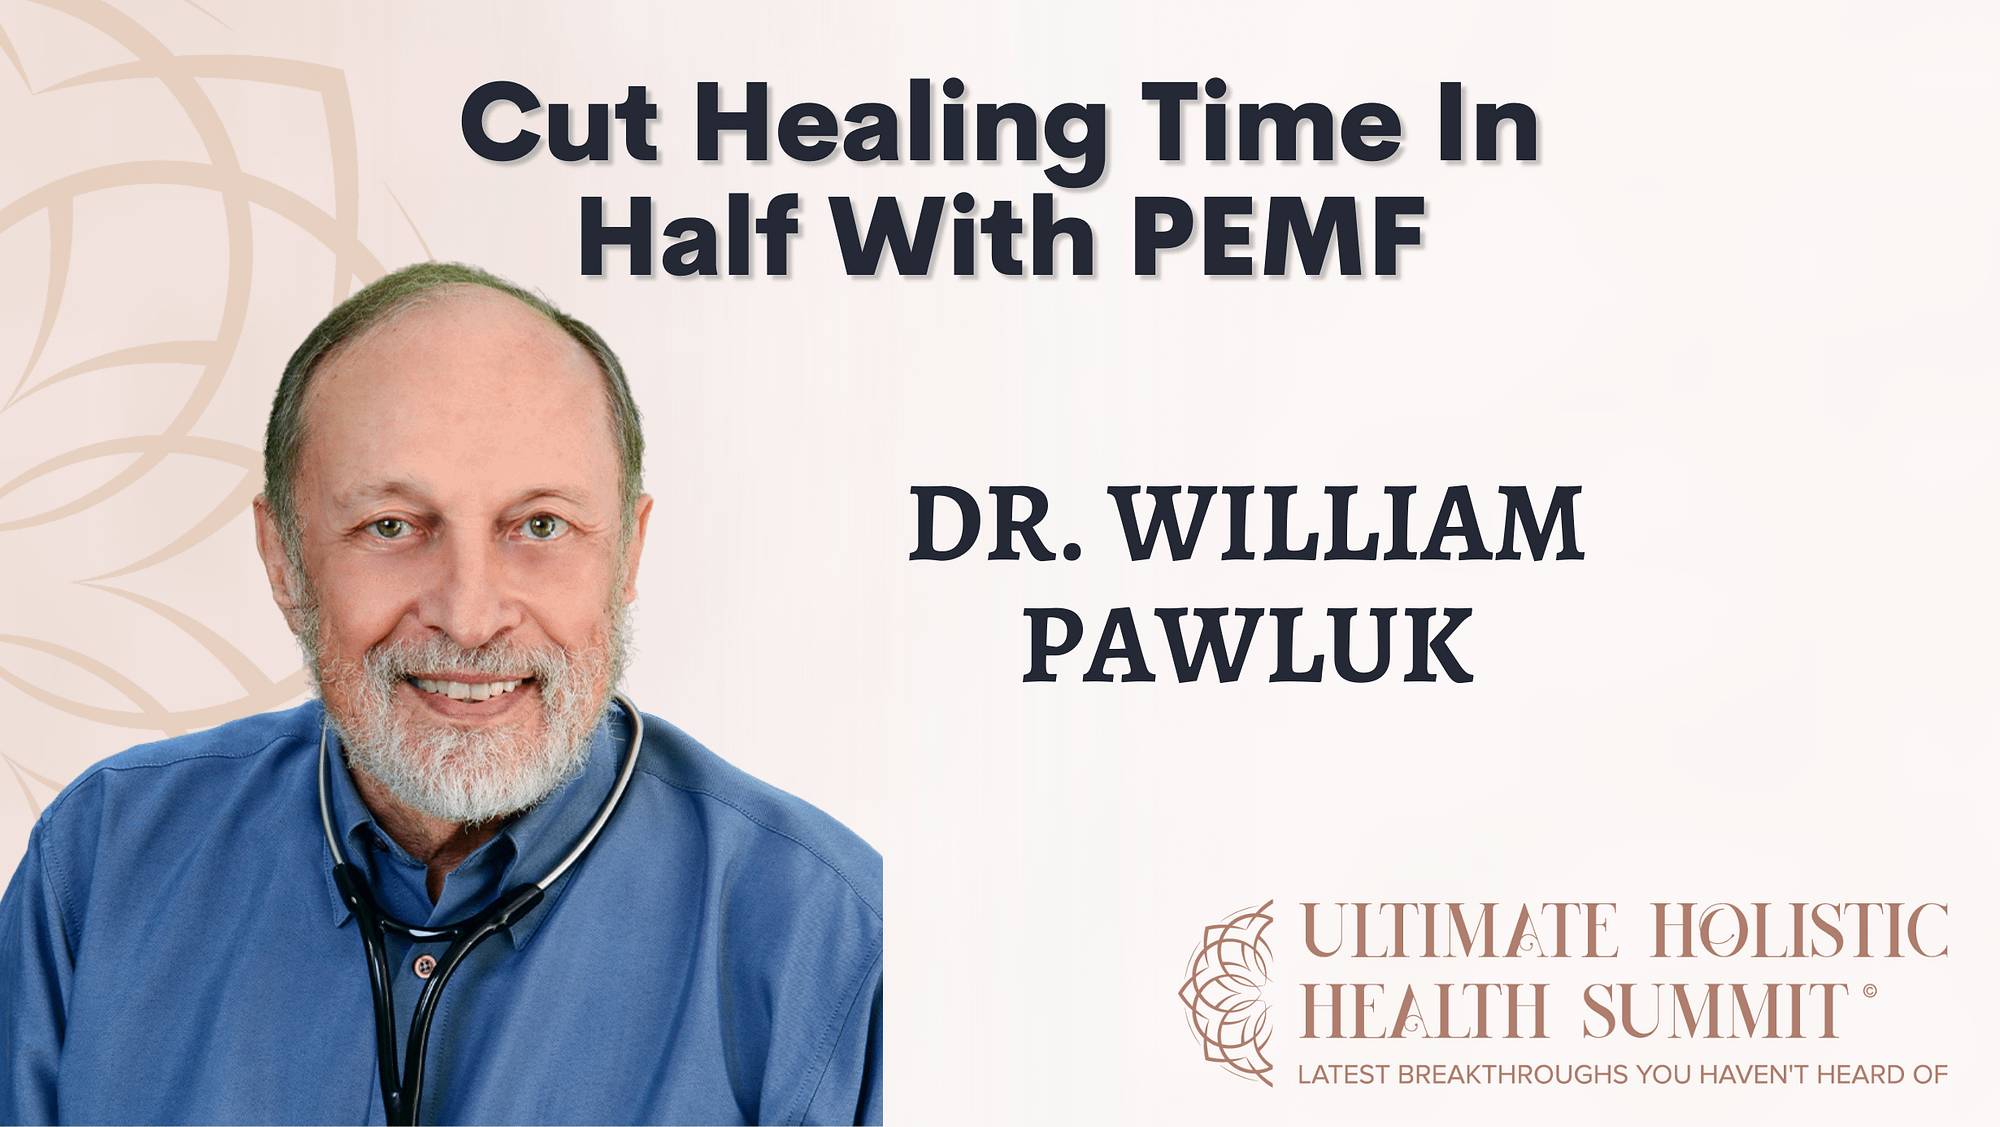 Cut Healing Time In Half With PEMF